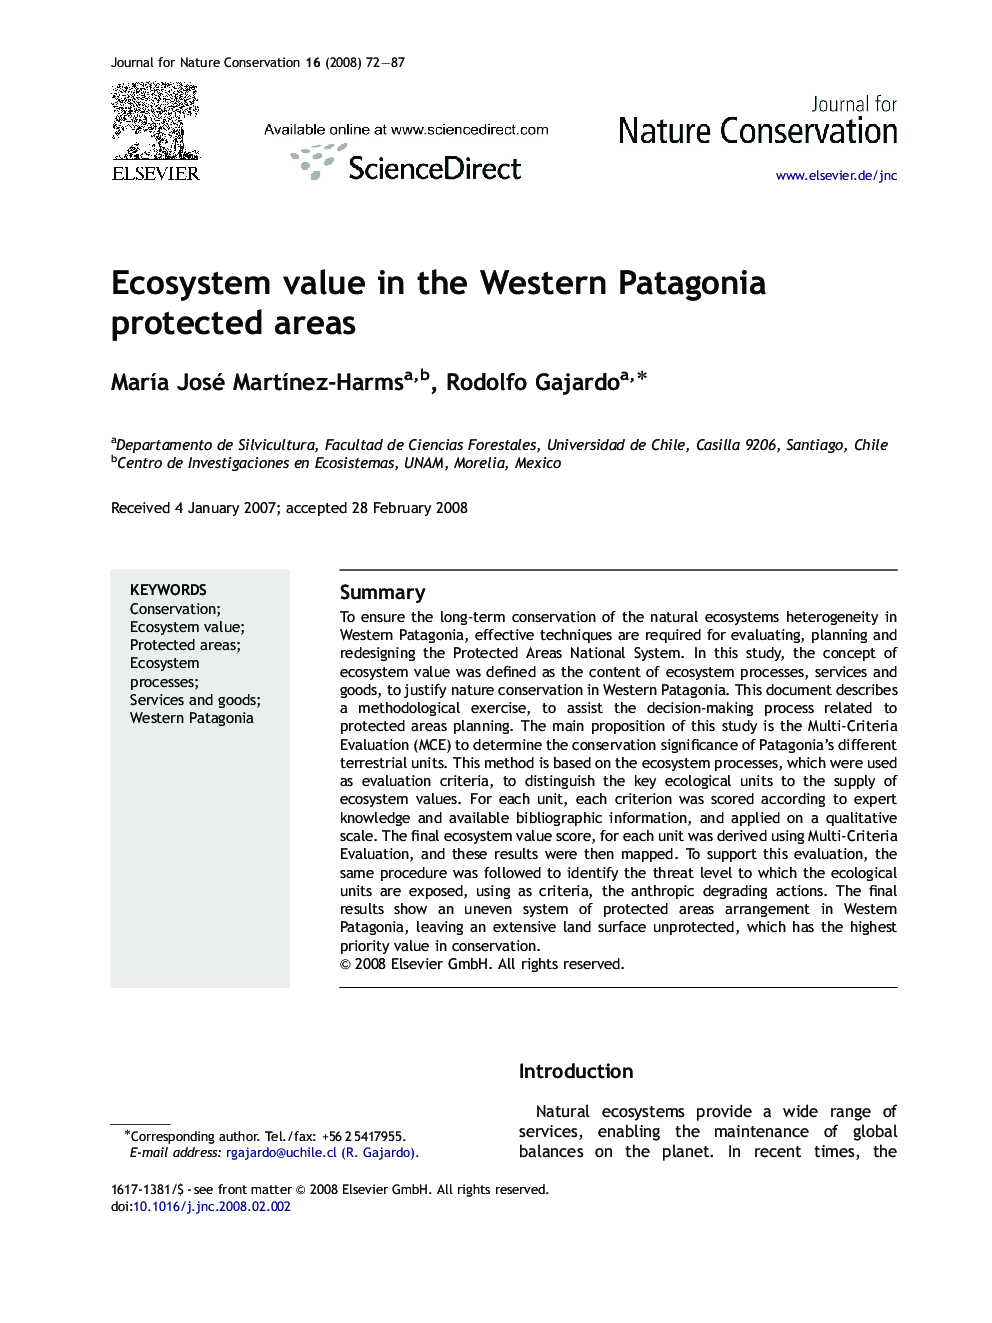 Ecosystem value in the Western Patagonia protected areas